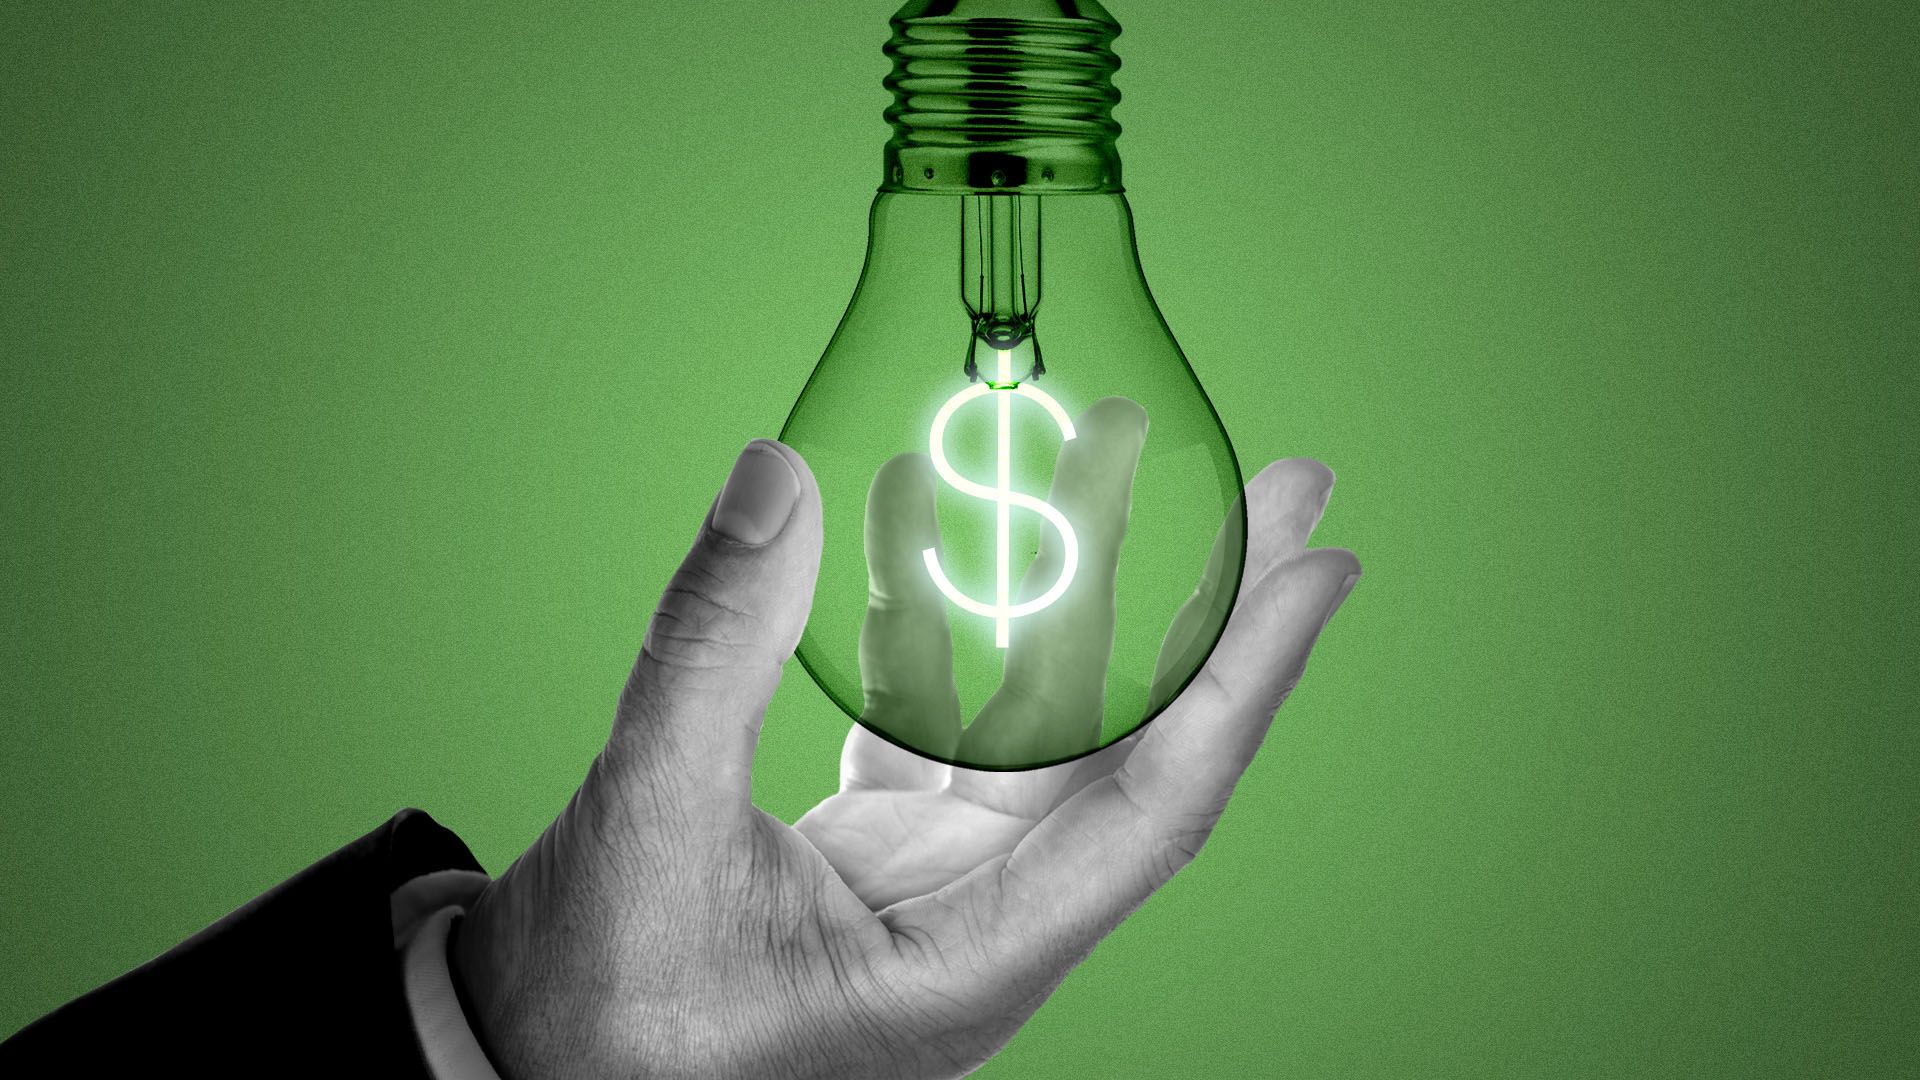 Illustration of a hand screwing in a lightbulb with a dollar sign in the middle